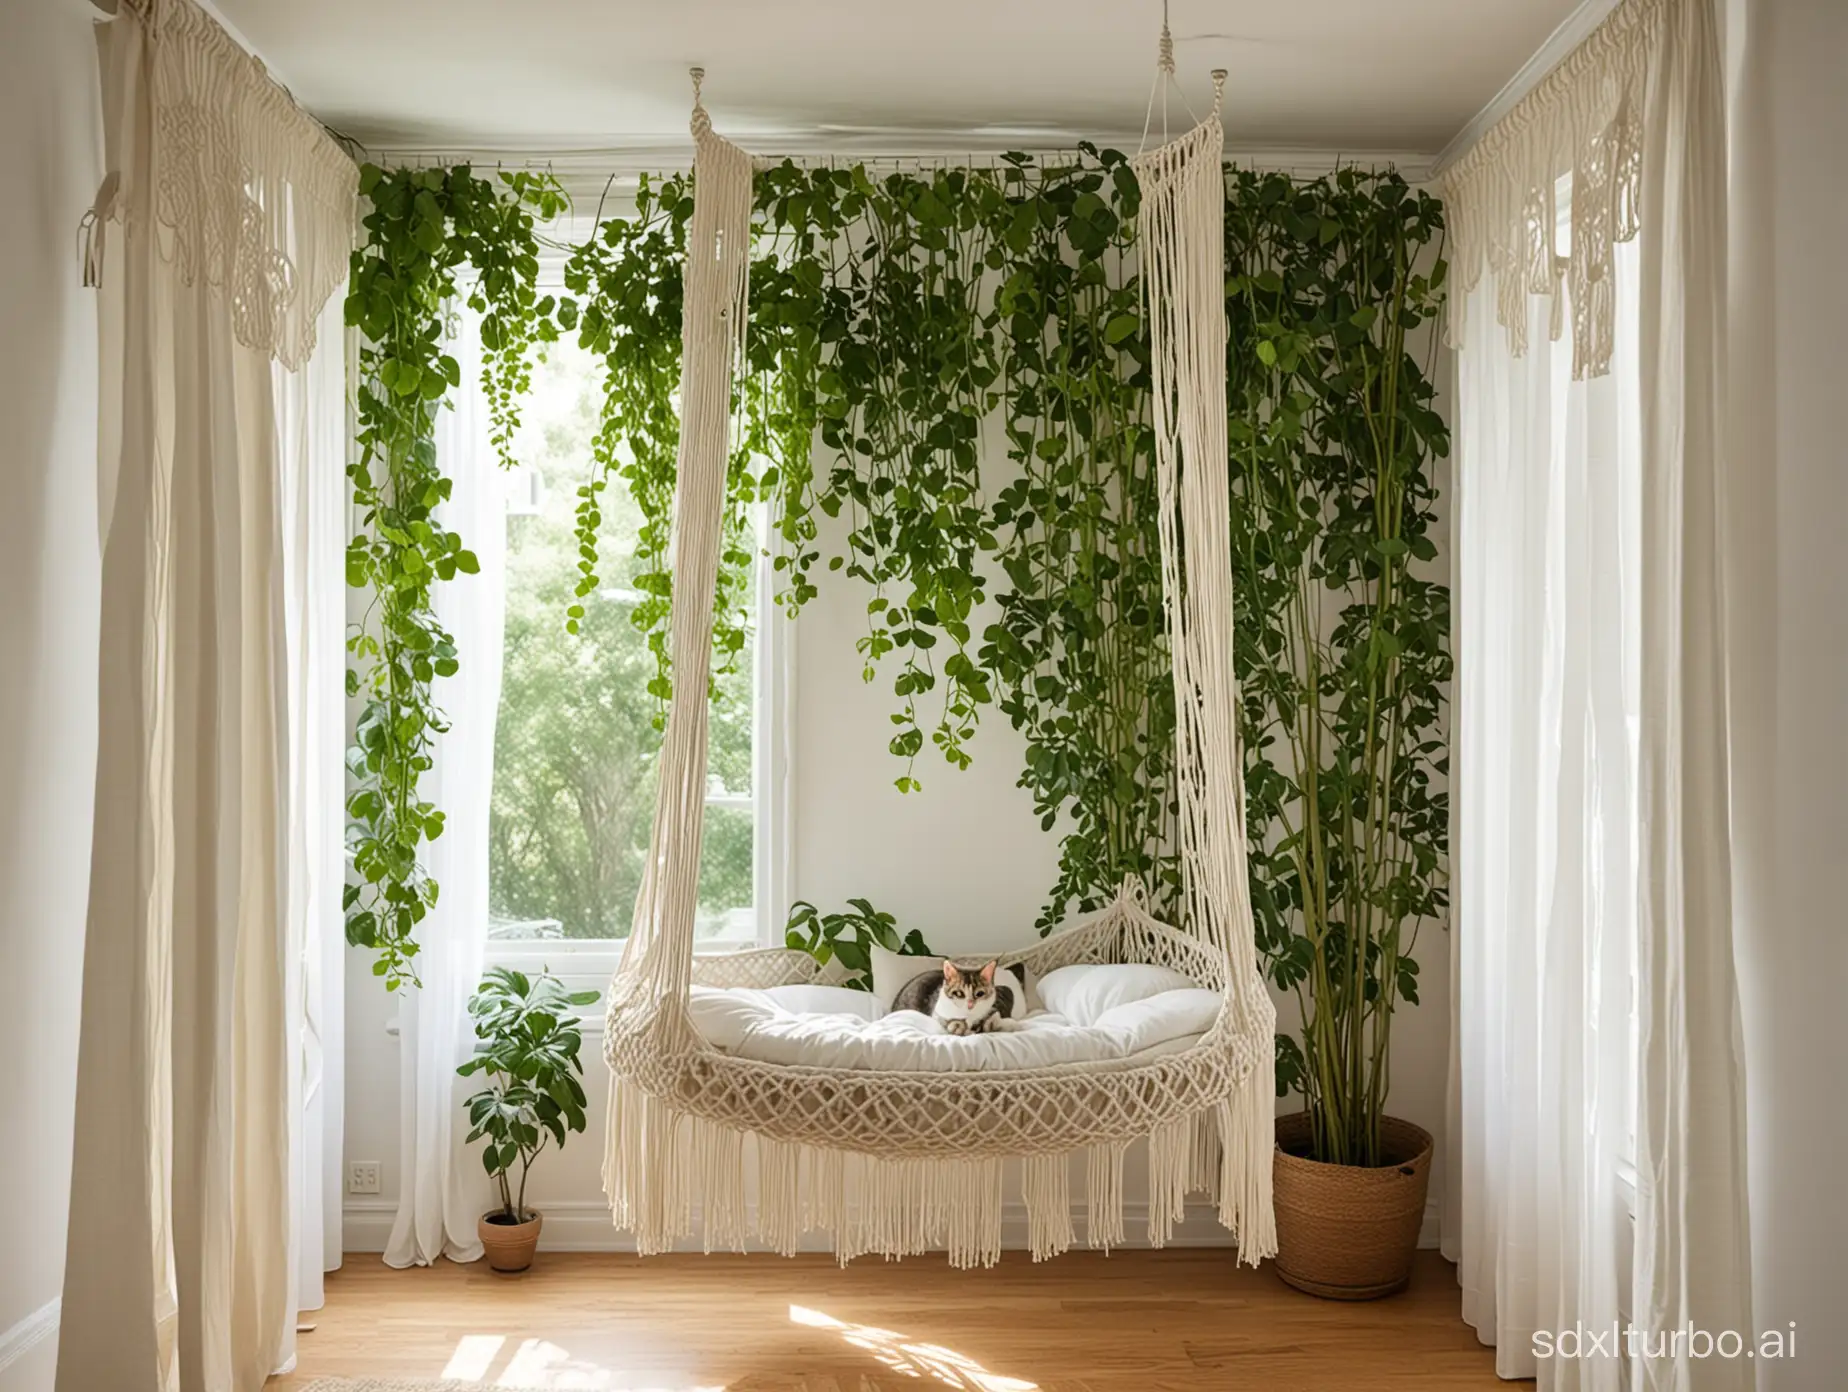 macrame cat hanging bed the curtains are blowing in the summer breeze, casting shadows from the trees inside the room.